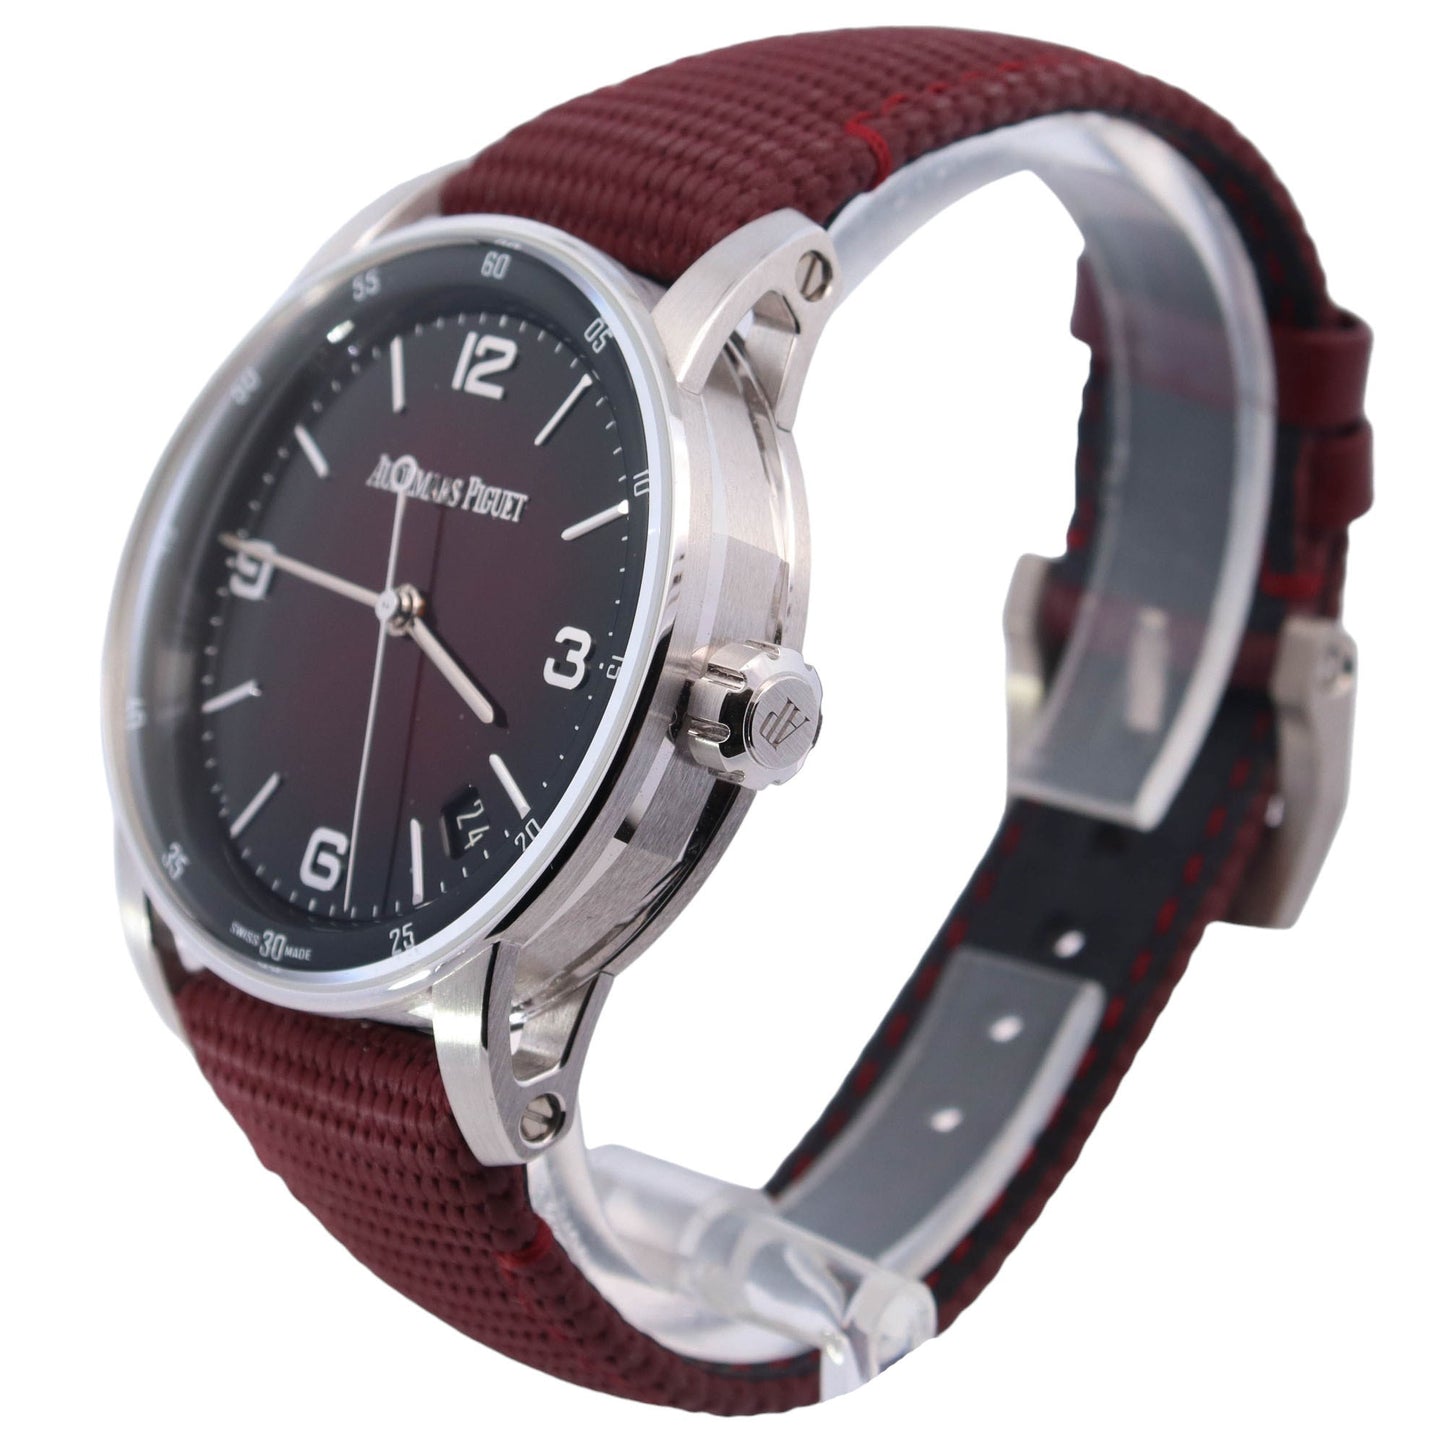 Audemars Piguet Code 11.59 White Gold 41mm Dark Red Arabic & Stick Dial Watch Reference# 15210BC.OO.A068CR.01